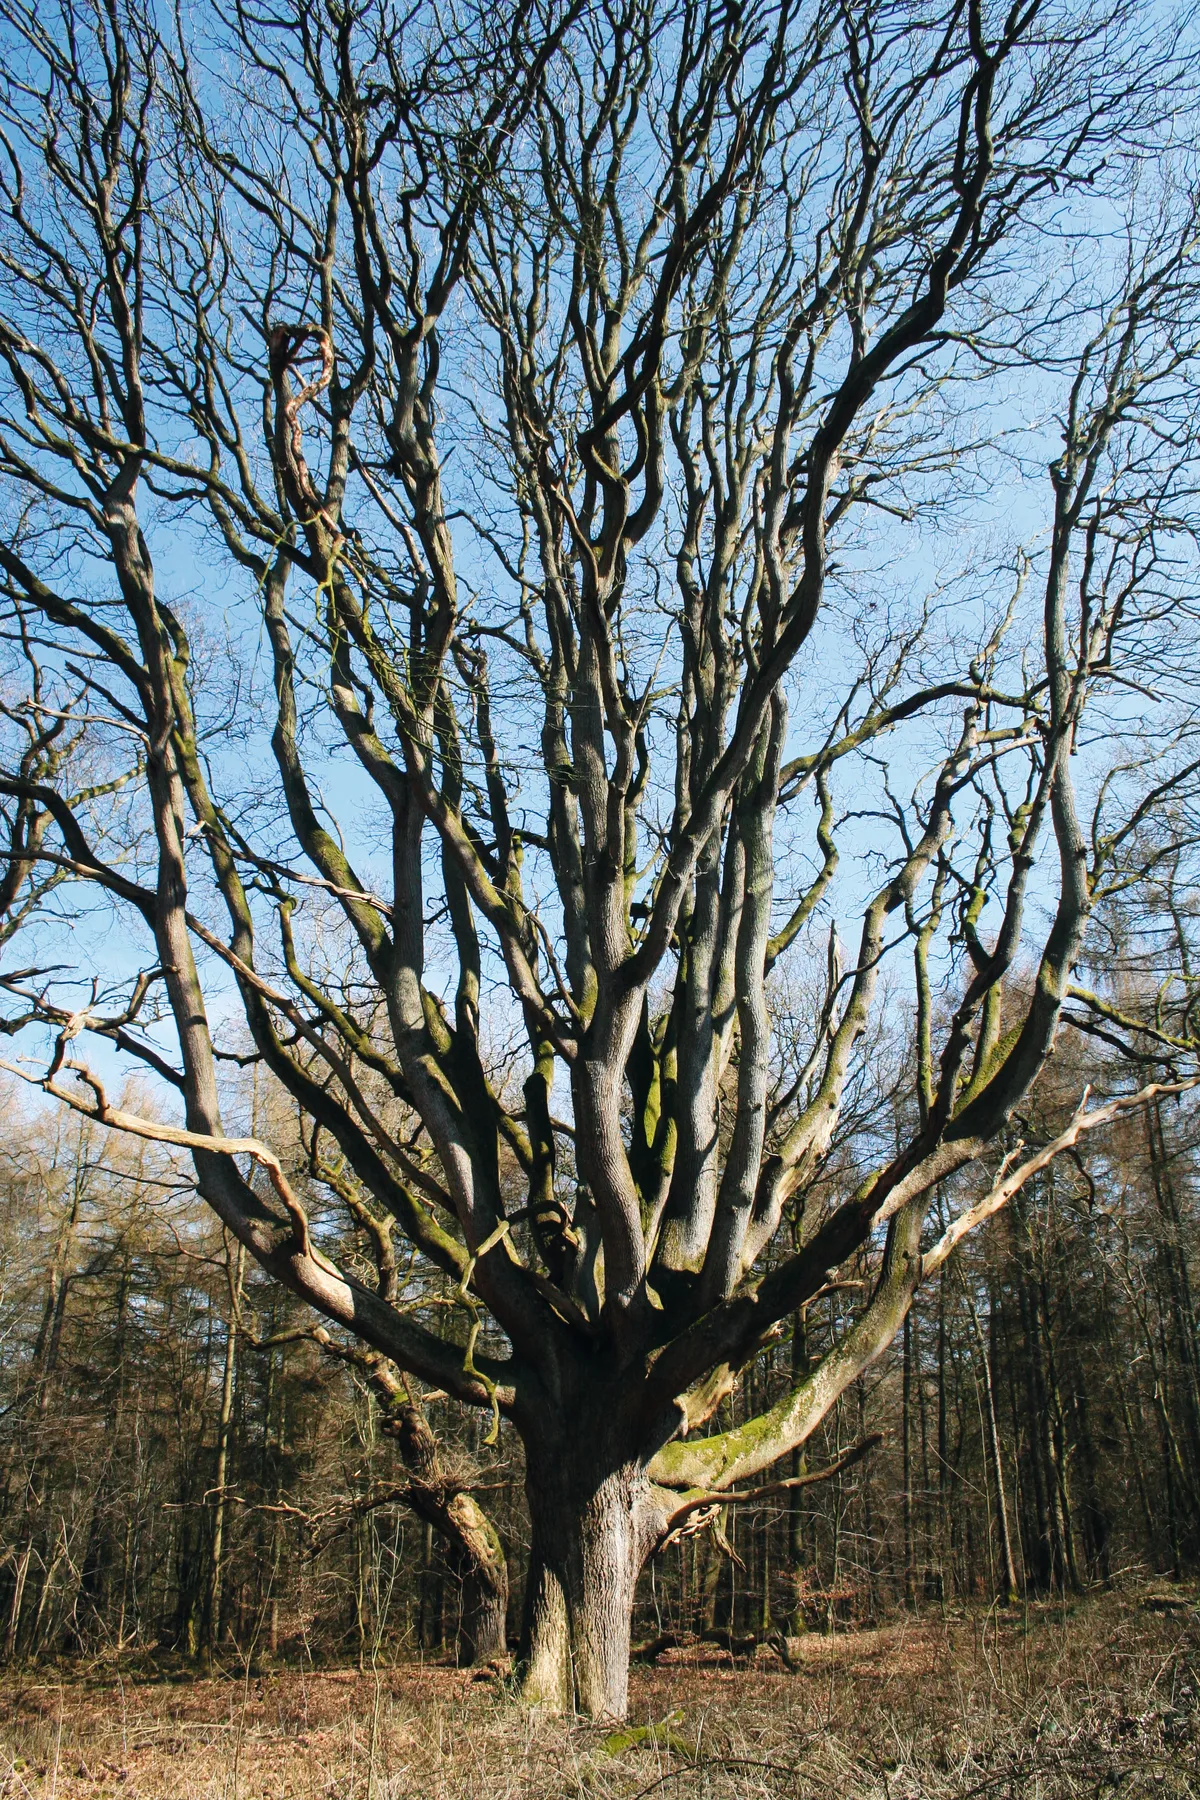 An ancient pollarded beech tree in Savernake Forest. /Alamy